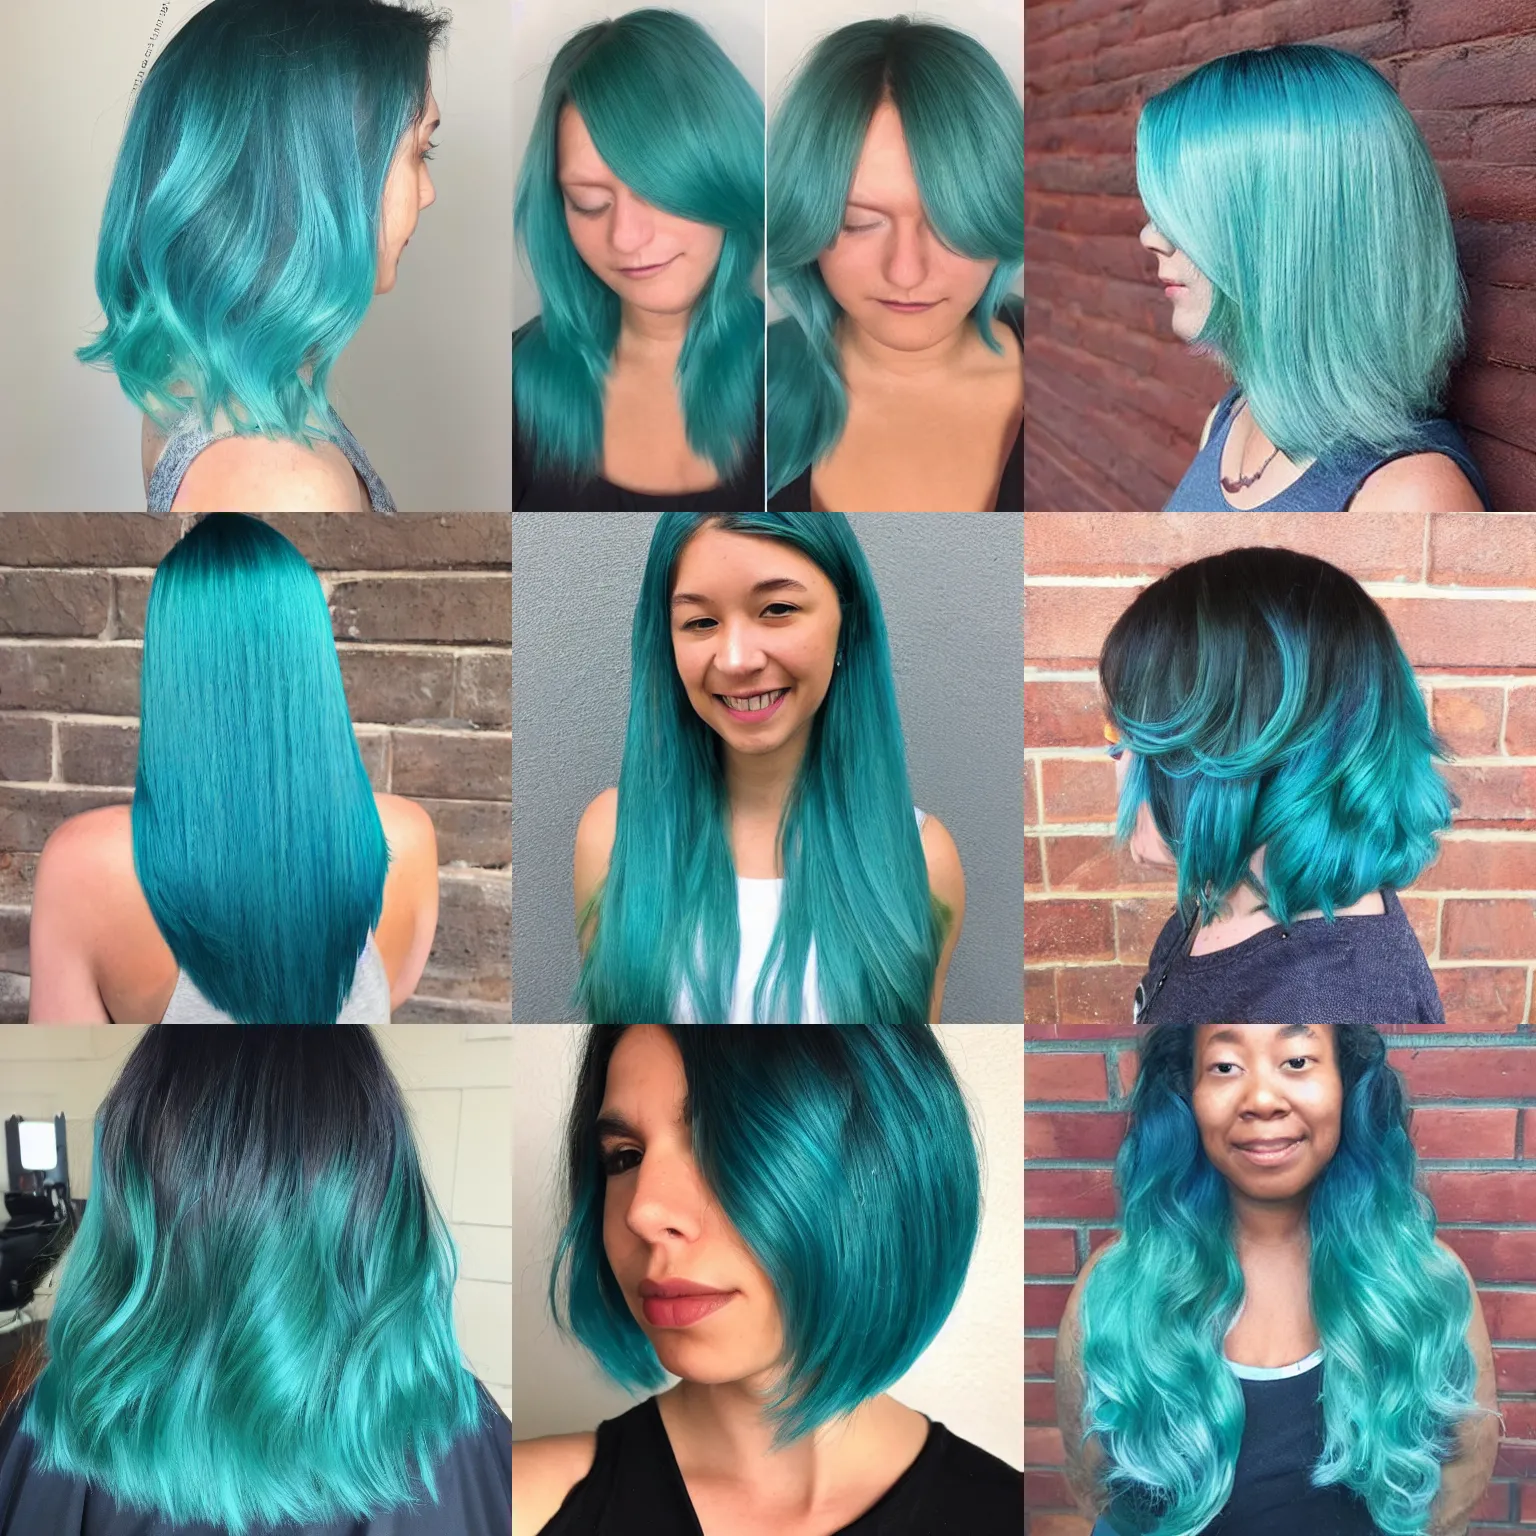 a-picture-of-stable-diffusion-with-teal-hair-stable-diffusion-openart